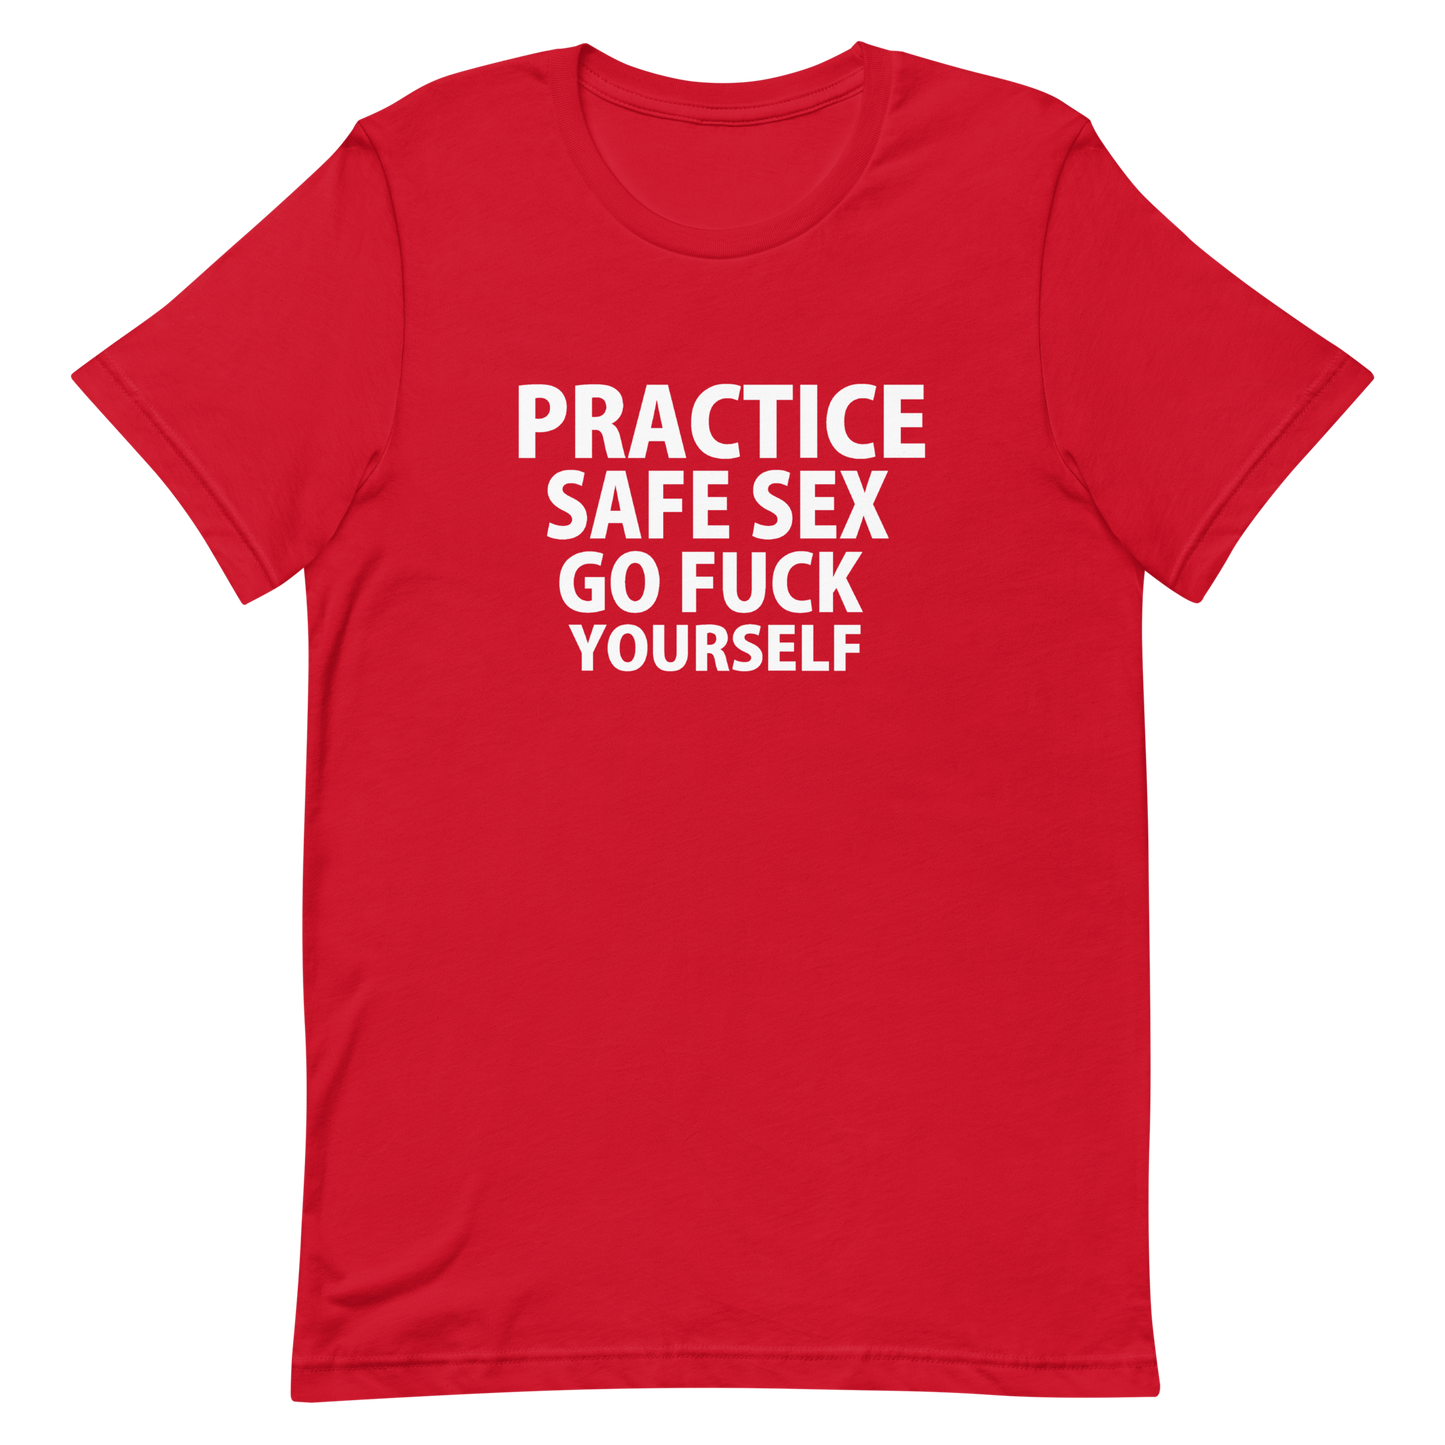 Practice Safe Sex Go Fuck Yourself T-Shirt - Red